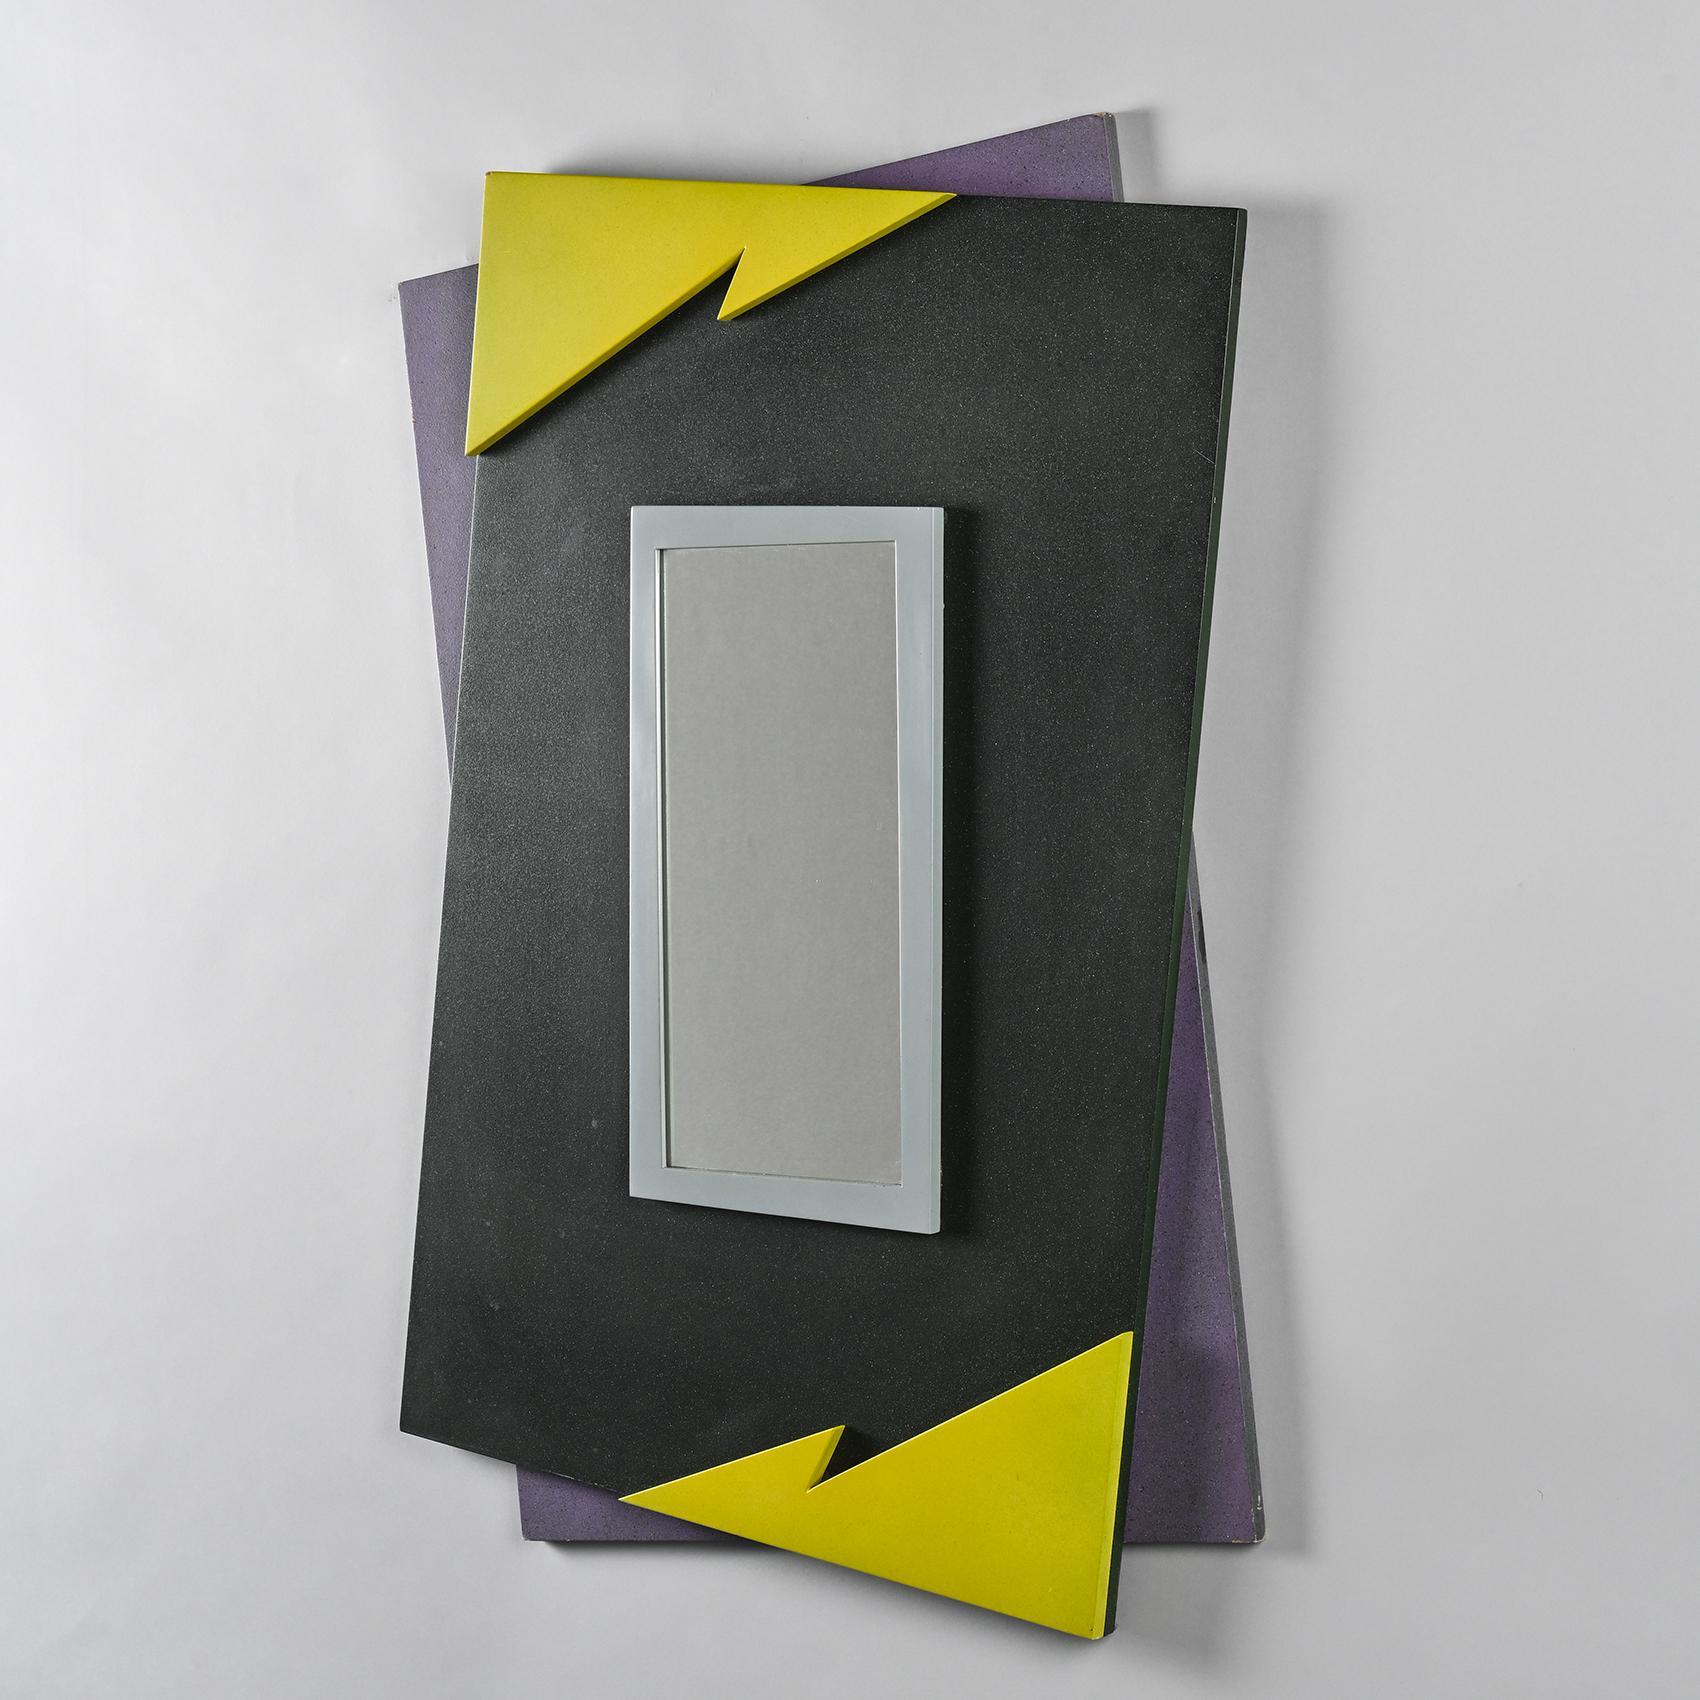 A mirror with a frame crafted from laminated particleboard in a boldly 80s design featuring black, yellow, and speckled black and violet patterns.

Marked on the reverse side with Mario Eichmann's signature and the publisher's name.

Manufacturer :